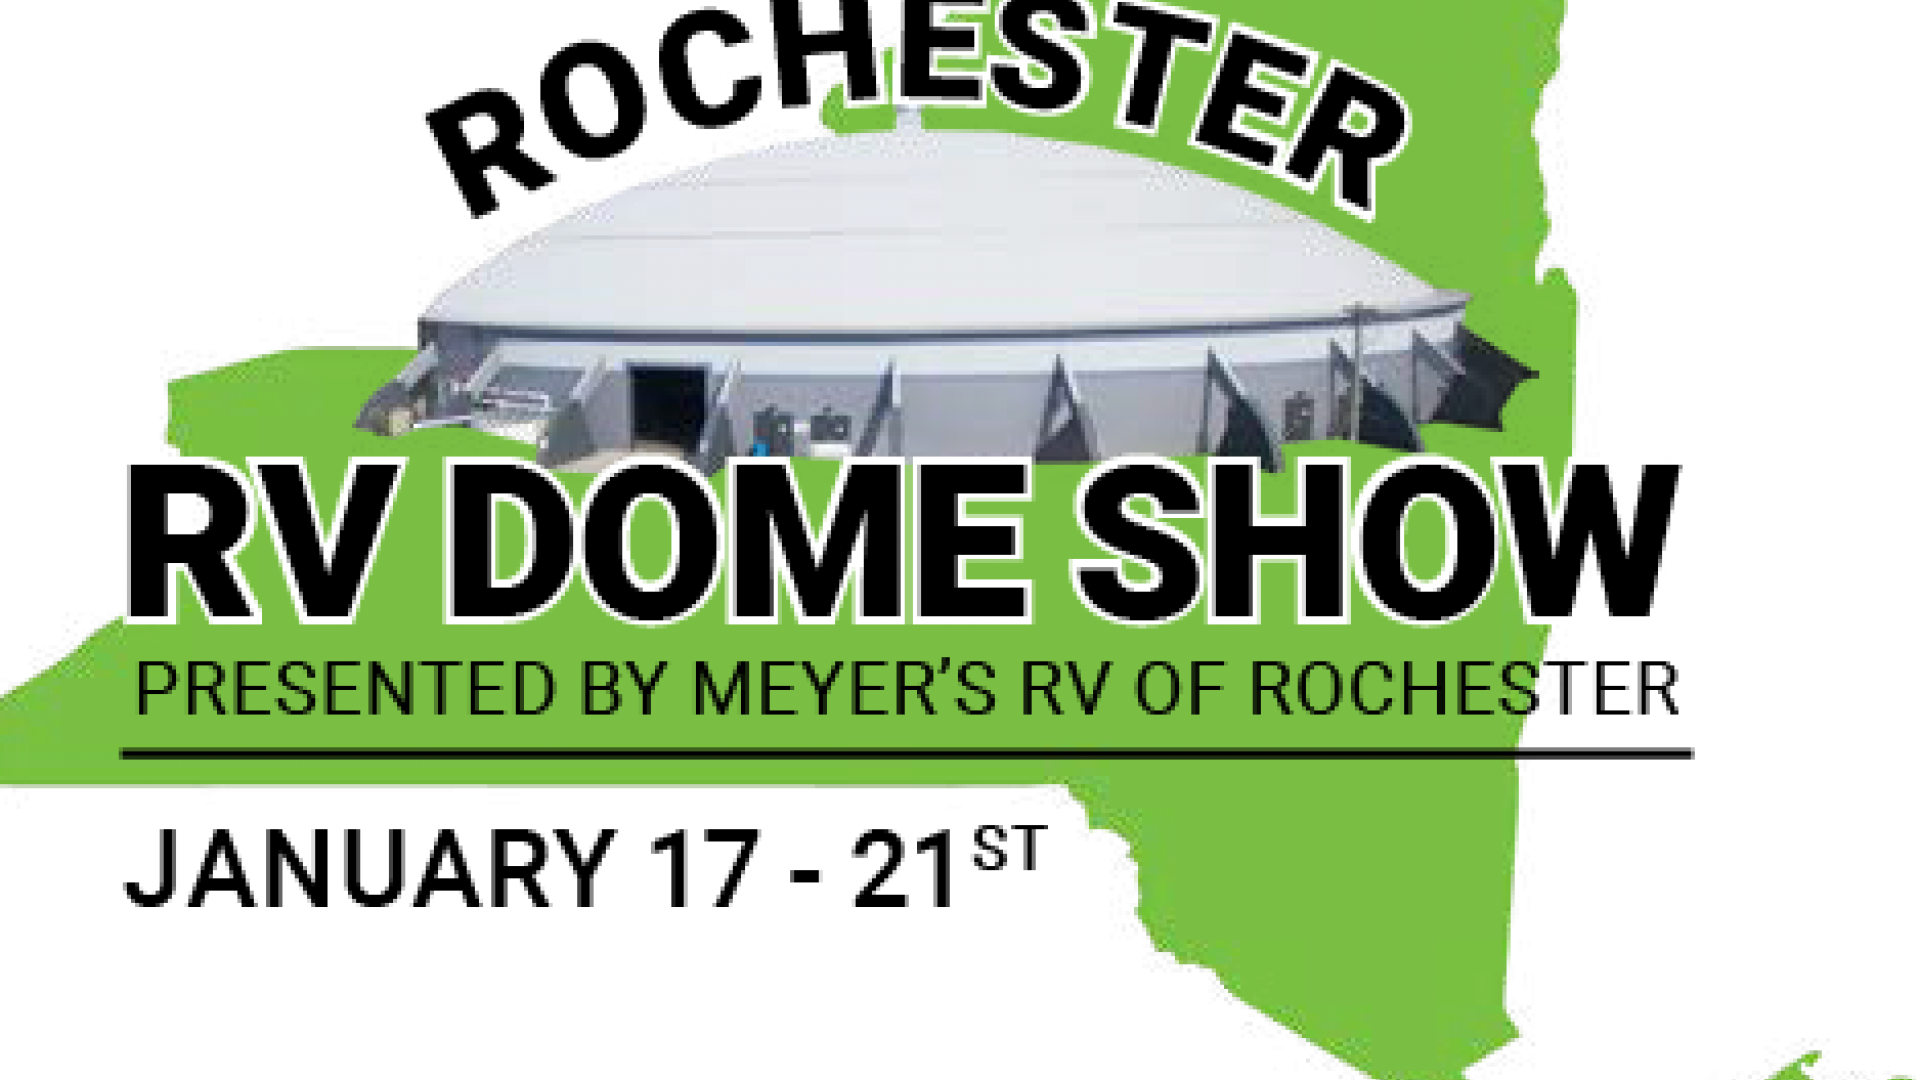 Rochester RV Dome Show GDRV4Life Your Connection to the Grand